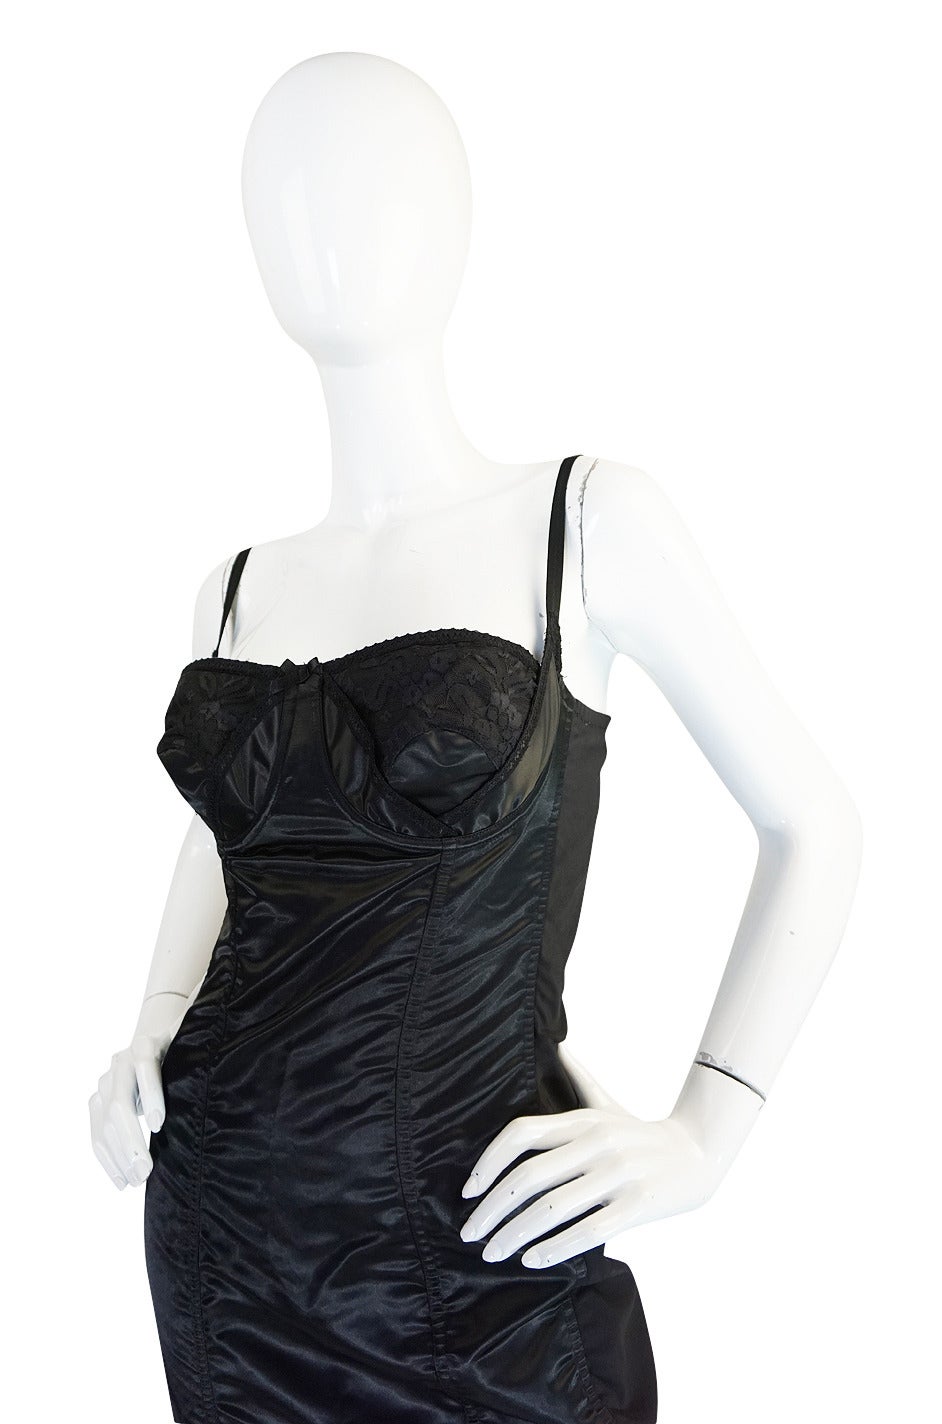 S/S 1992 Rare Dolce and Gabbana Lingerie Corset Bustier Dress at ...